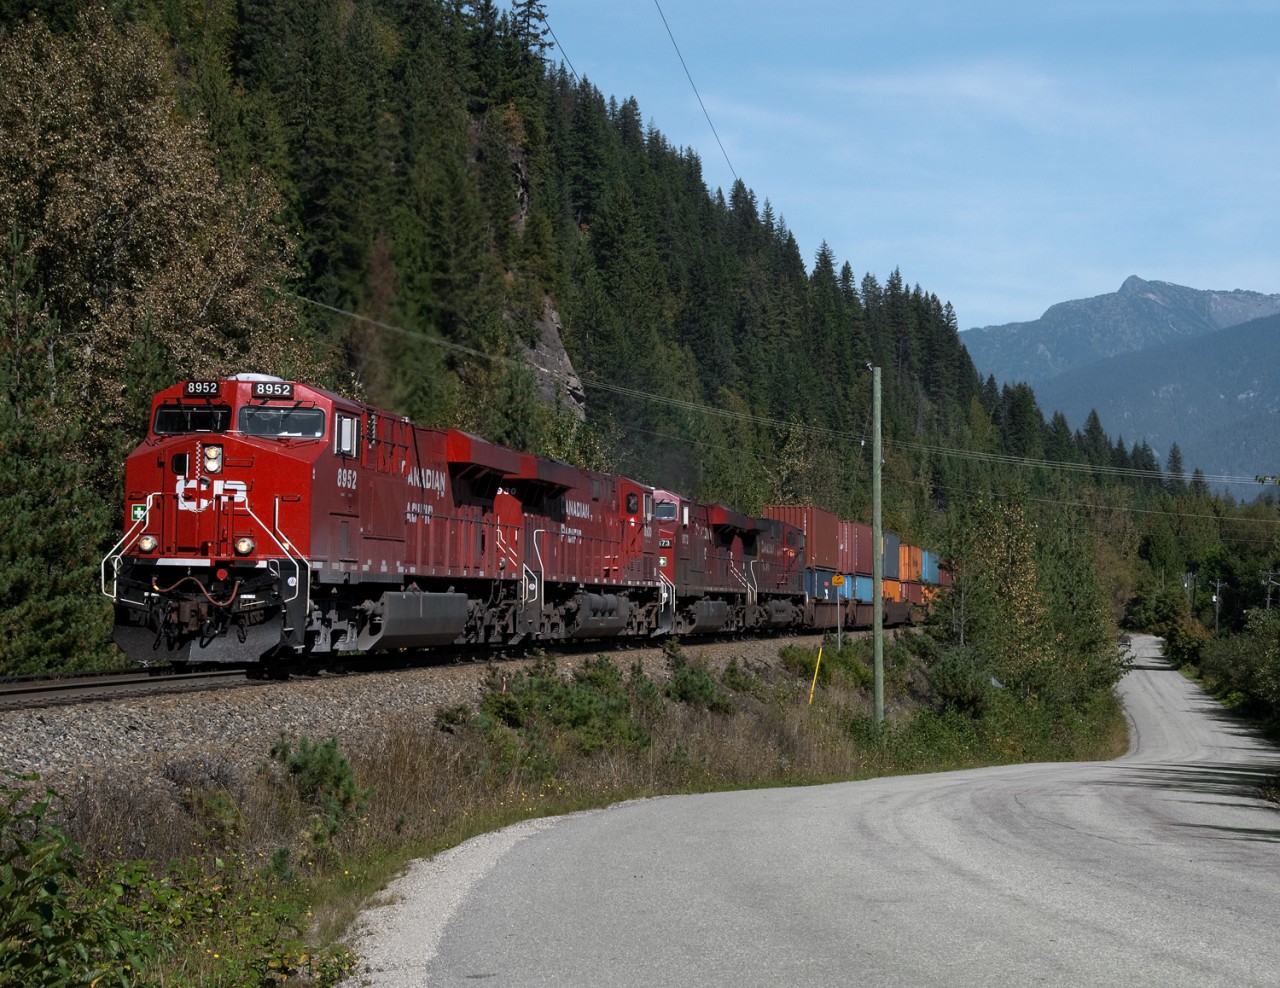 Westbound intermodal starts the climb out of the Columbia Valley at Revelstoke on the south track. The south track was constructed in the early 70's to ease the grade over Eagle Pass for westbound loads. The original line remained as the north track and usually handles eastbounds, mostly empties.